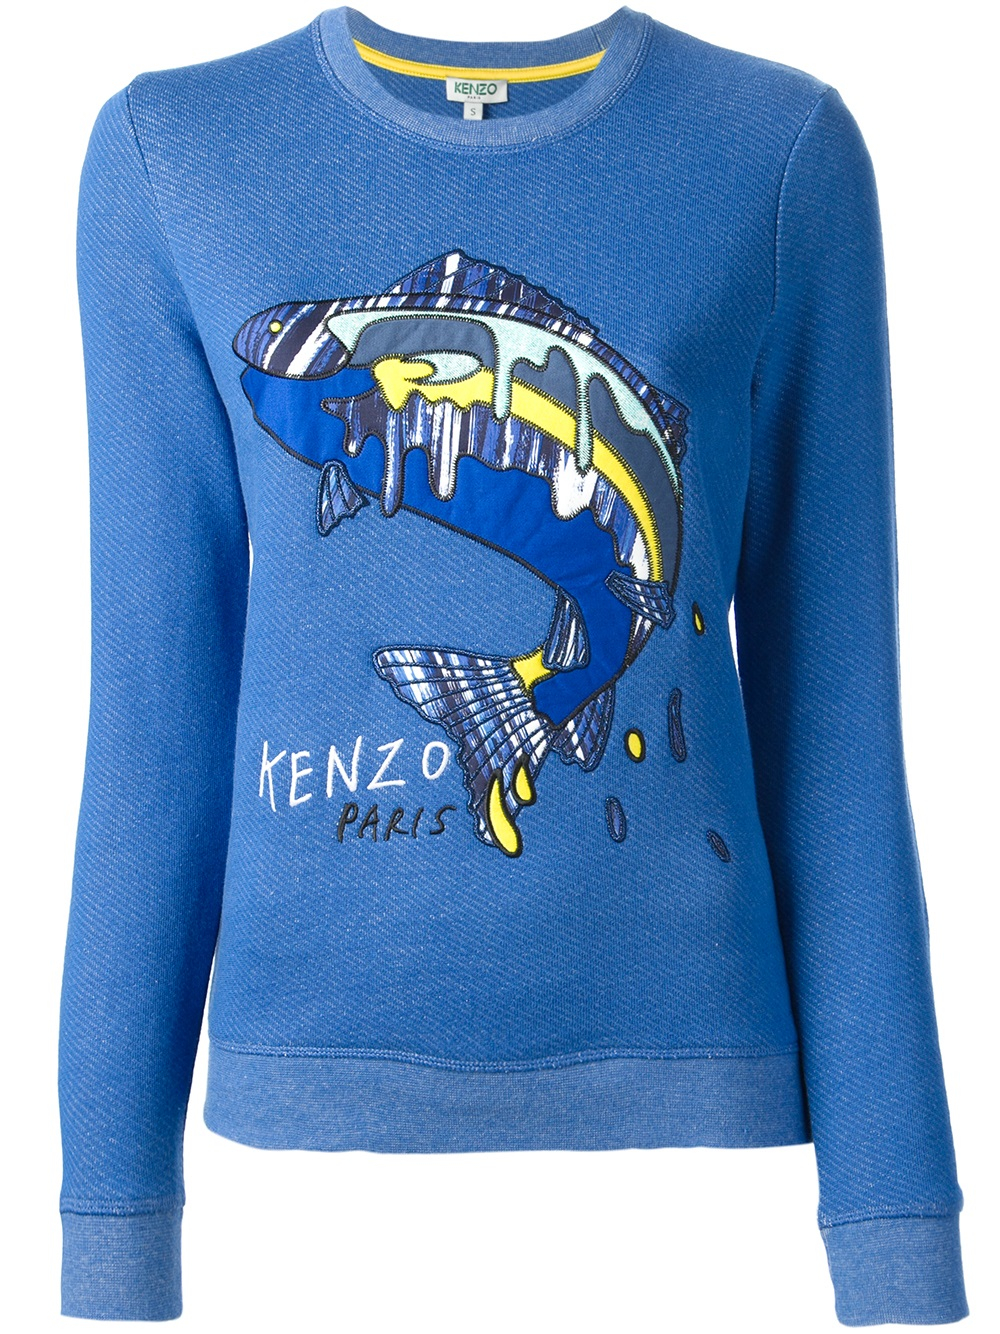 Lyst - Kenzo Embroidered Fish Sweatshirt in Blue